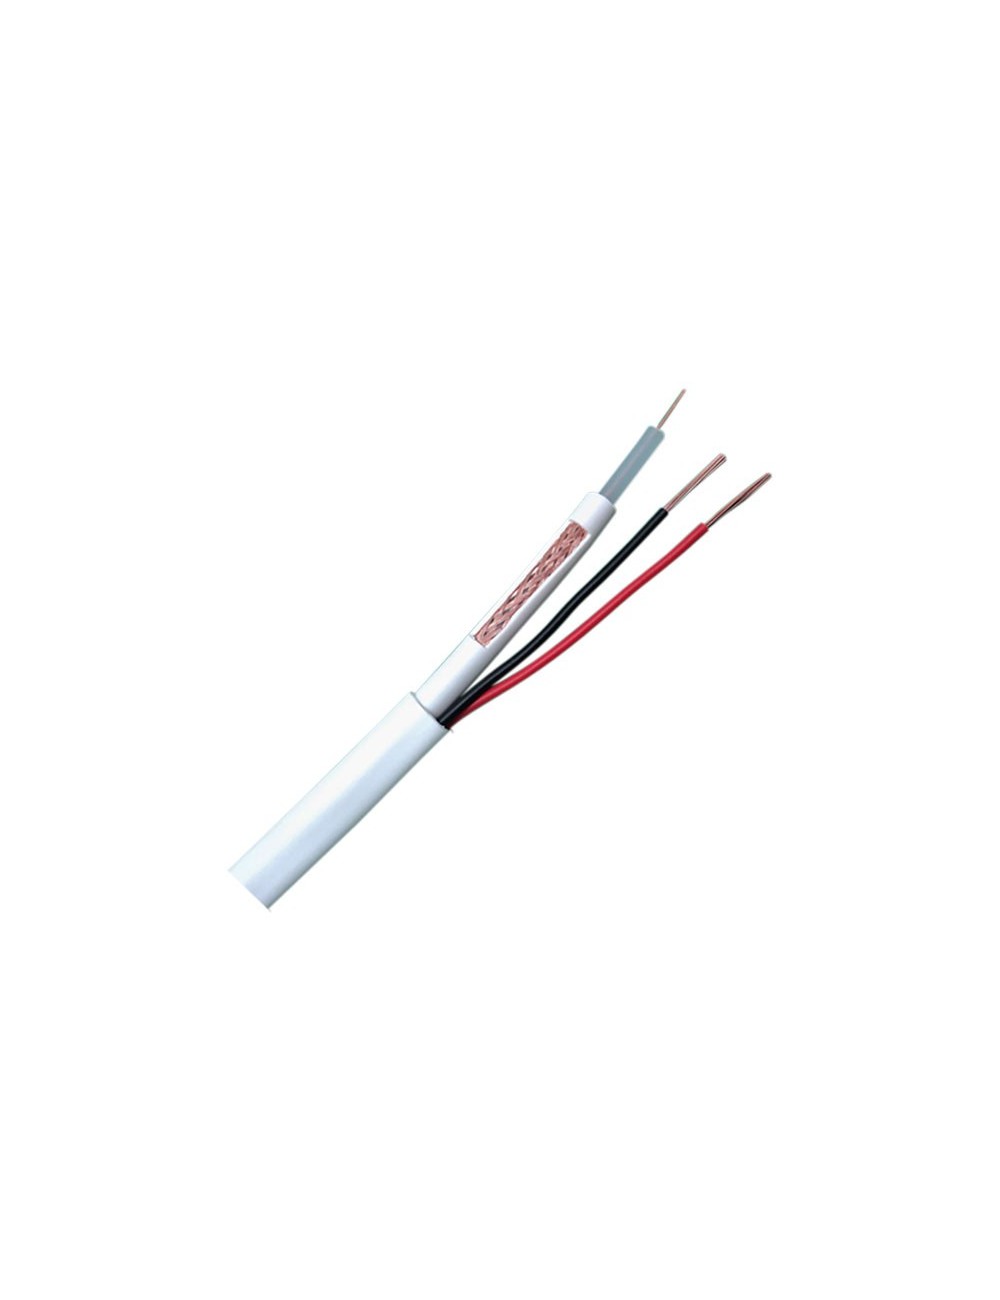 Coaxial cable combined with video RG59 + power supply - 100m